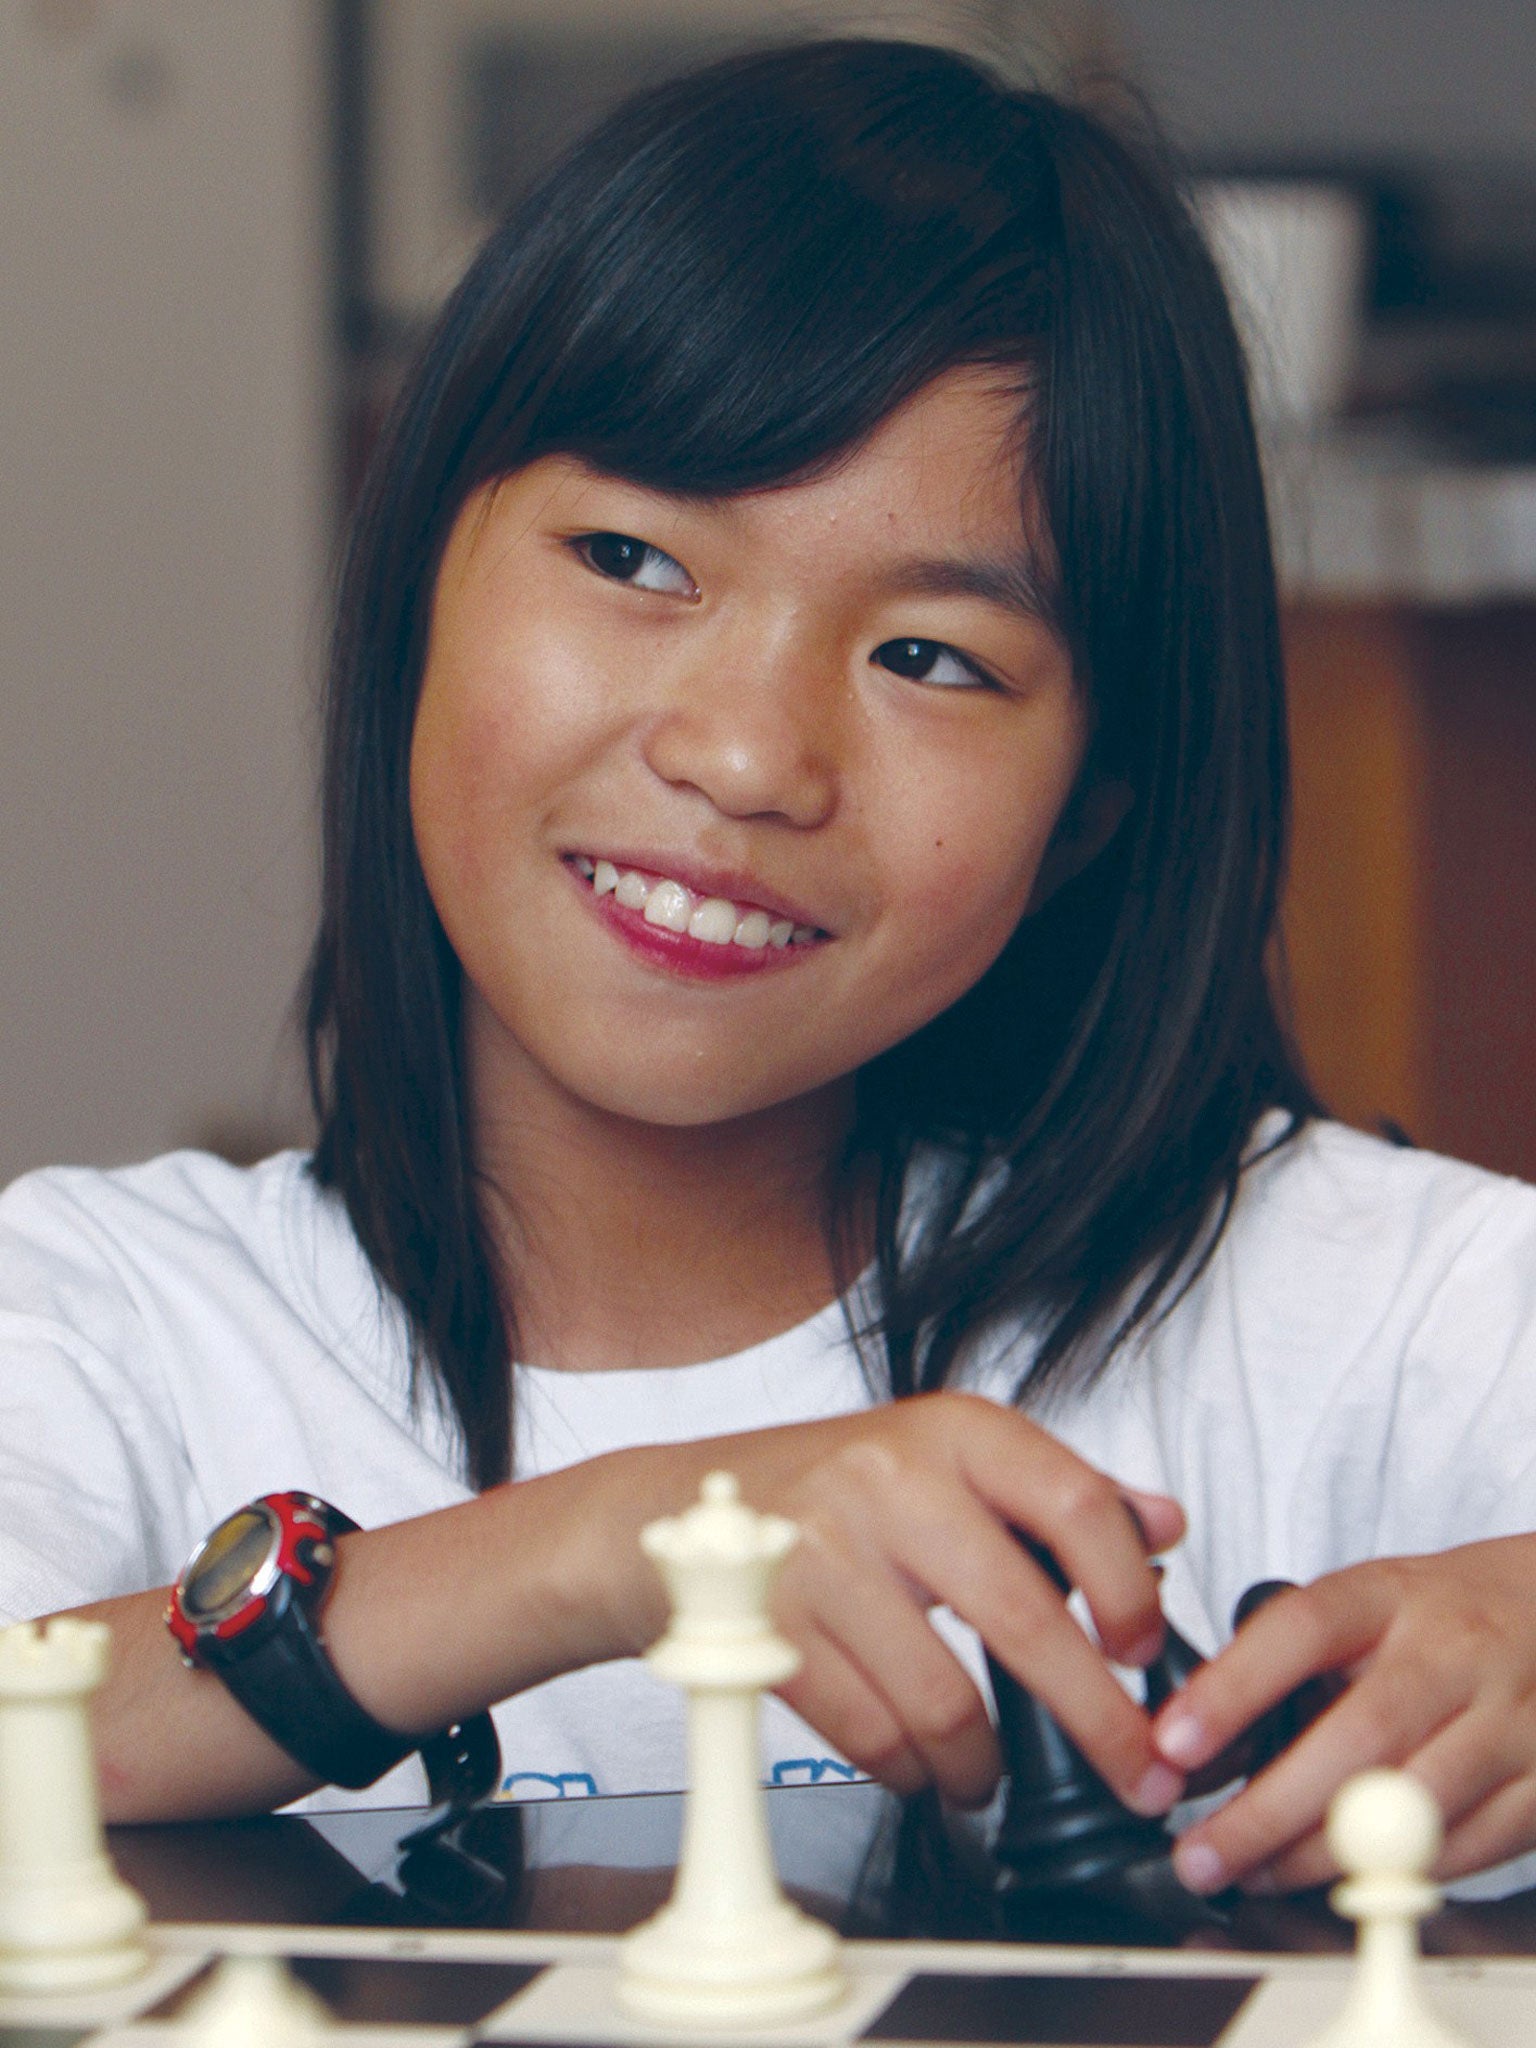 Carissa Yip is the youngest chess expert since records began